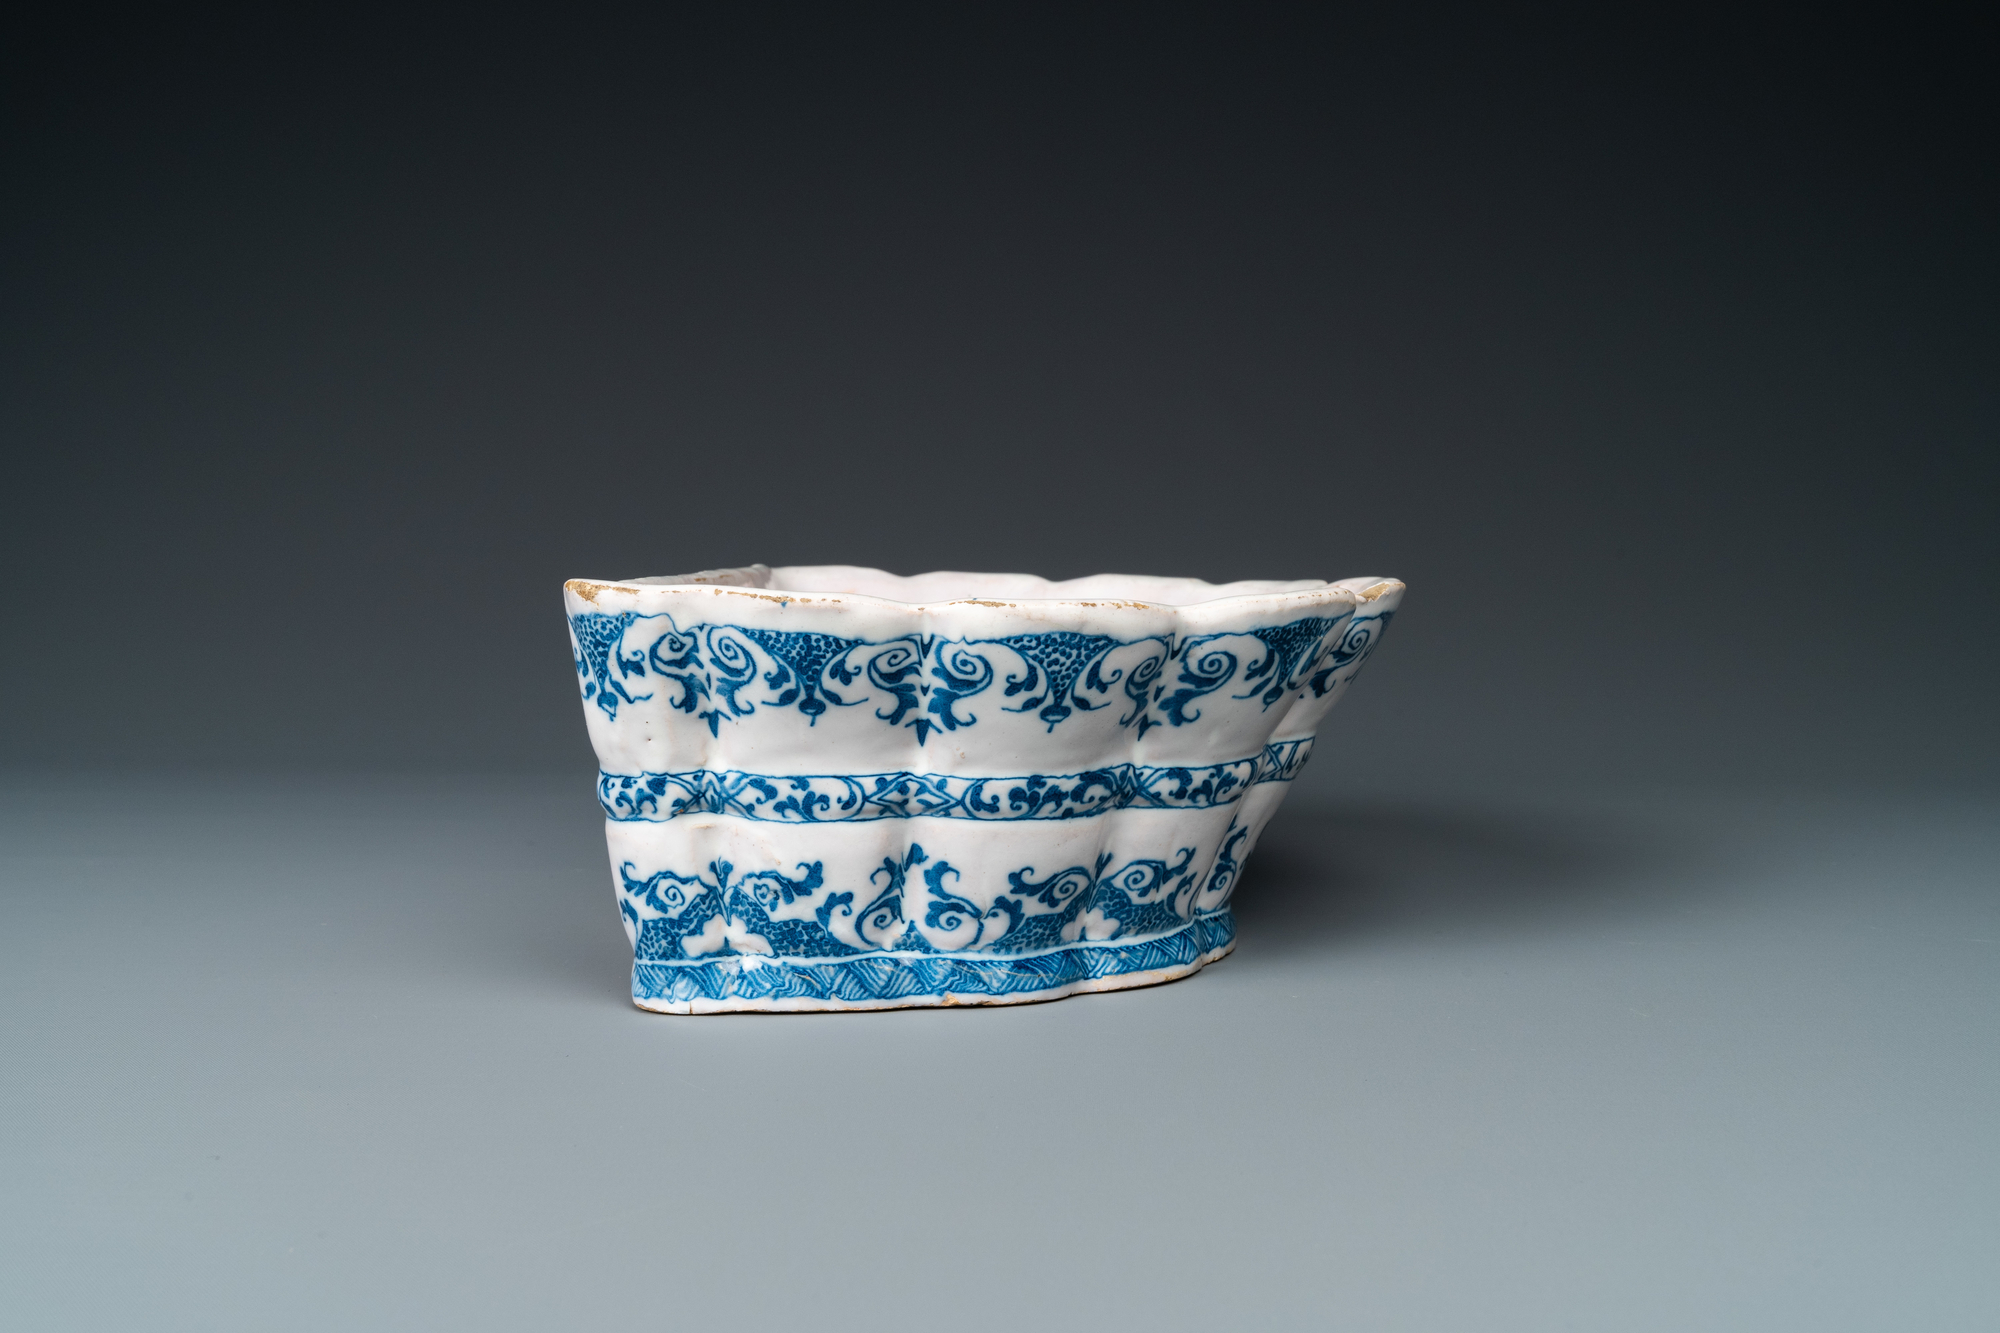 A blue and white Moustiers faience flower holder, France, 18th C. - Image 6 of 8